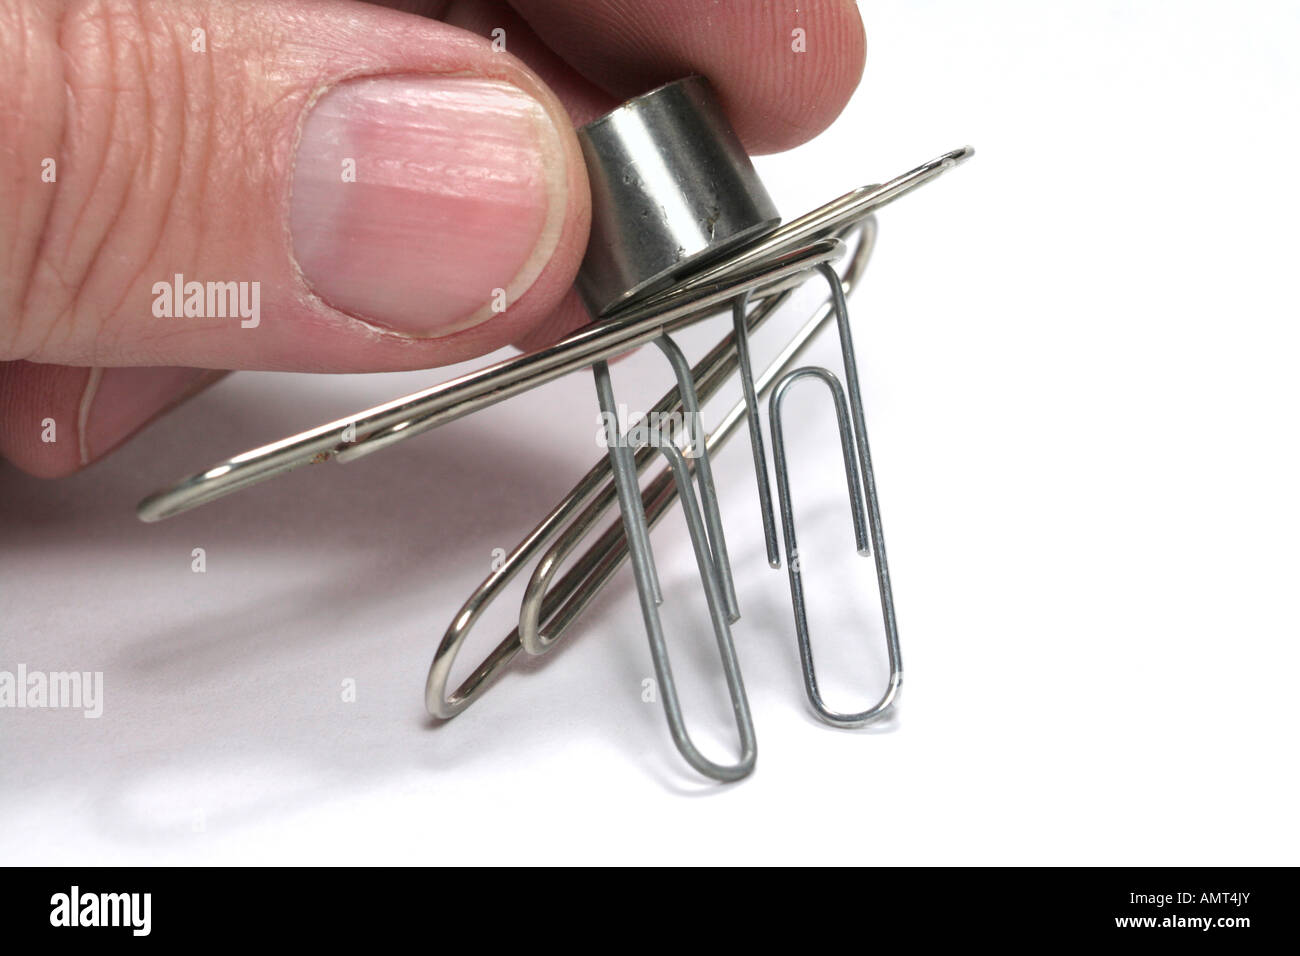 Magnet Attracting Paper Clips Designer Fashion